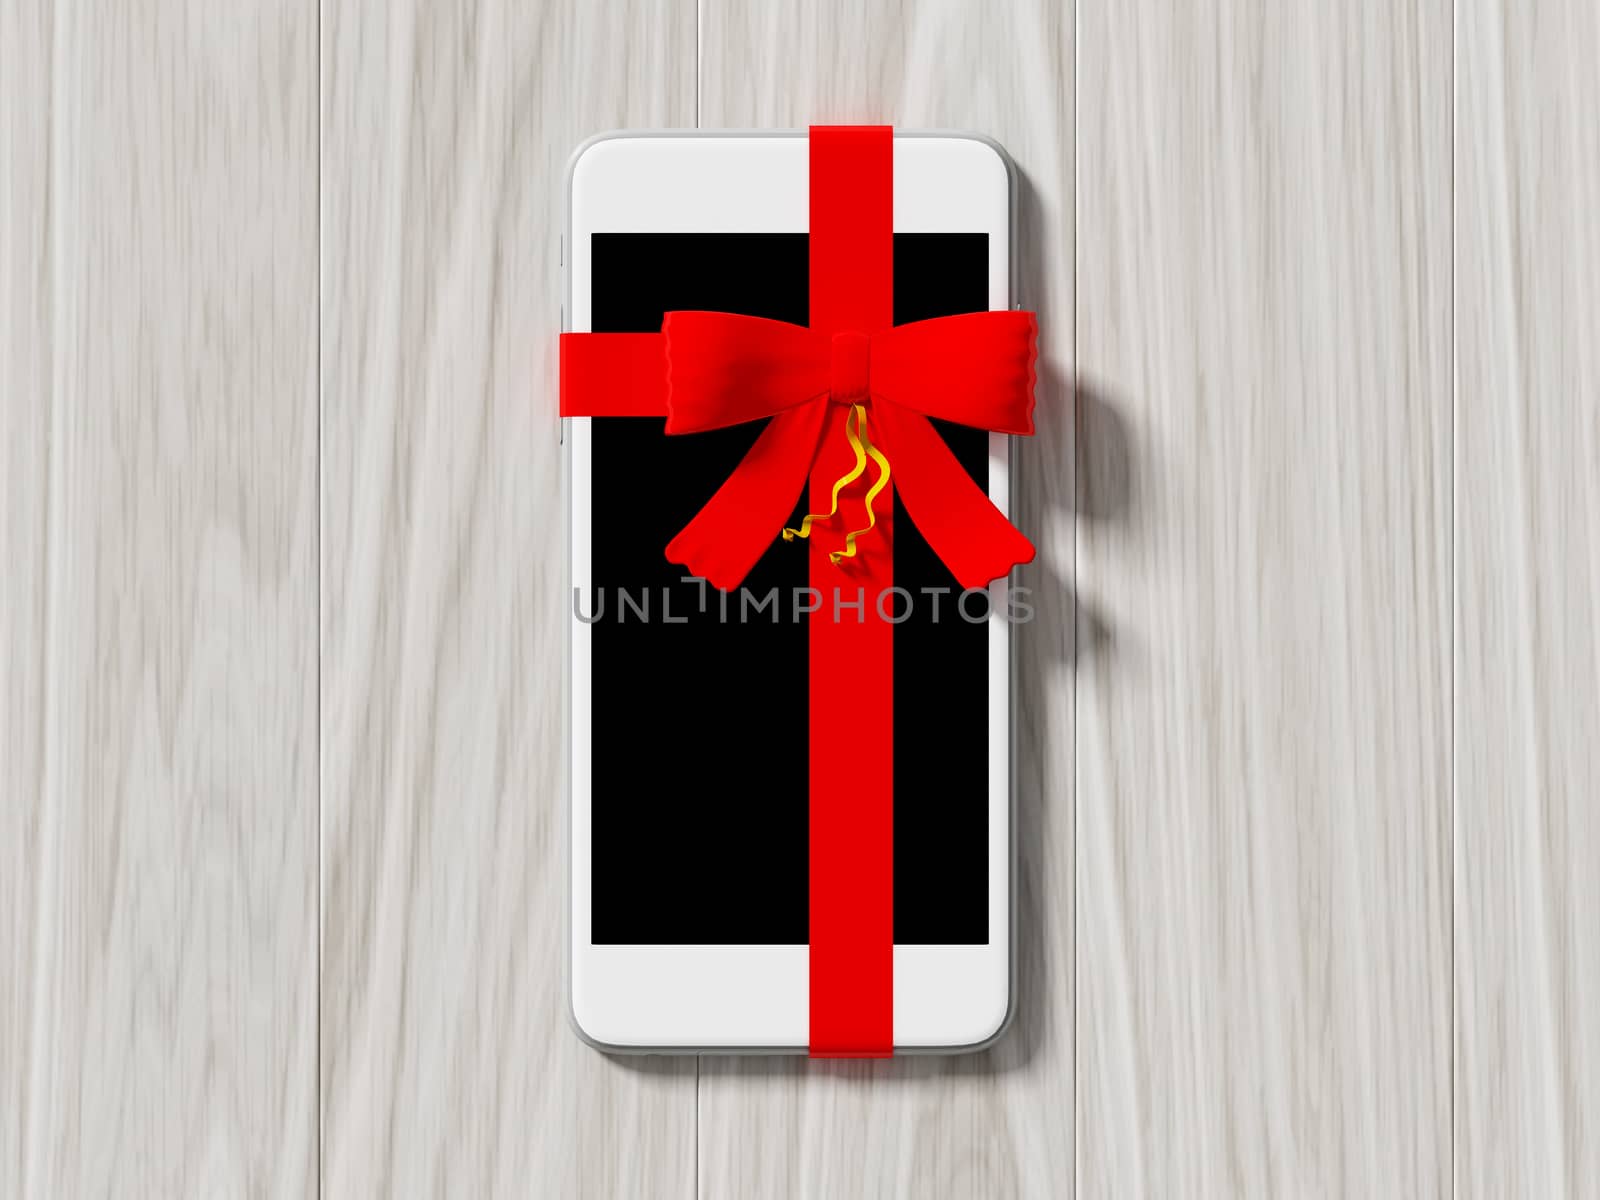 smartphone wrapped with color ribbon by teerawit